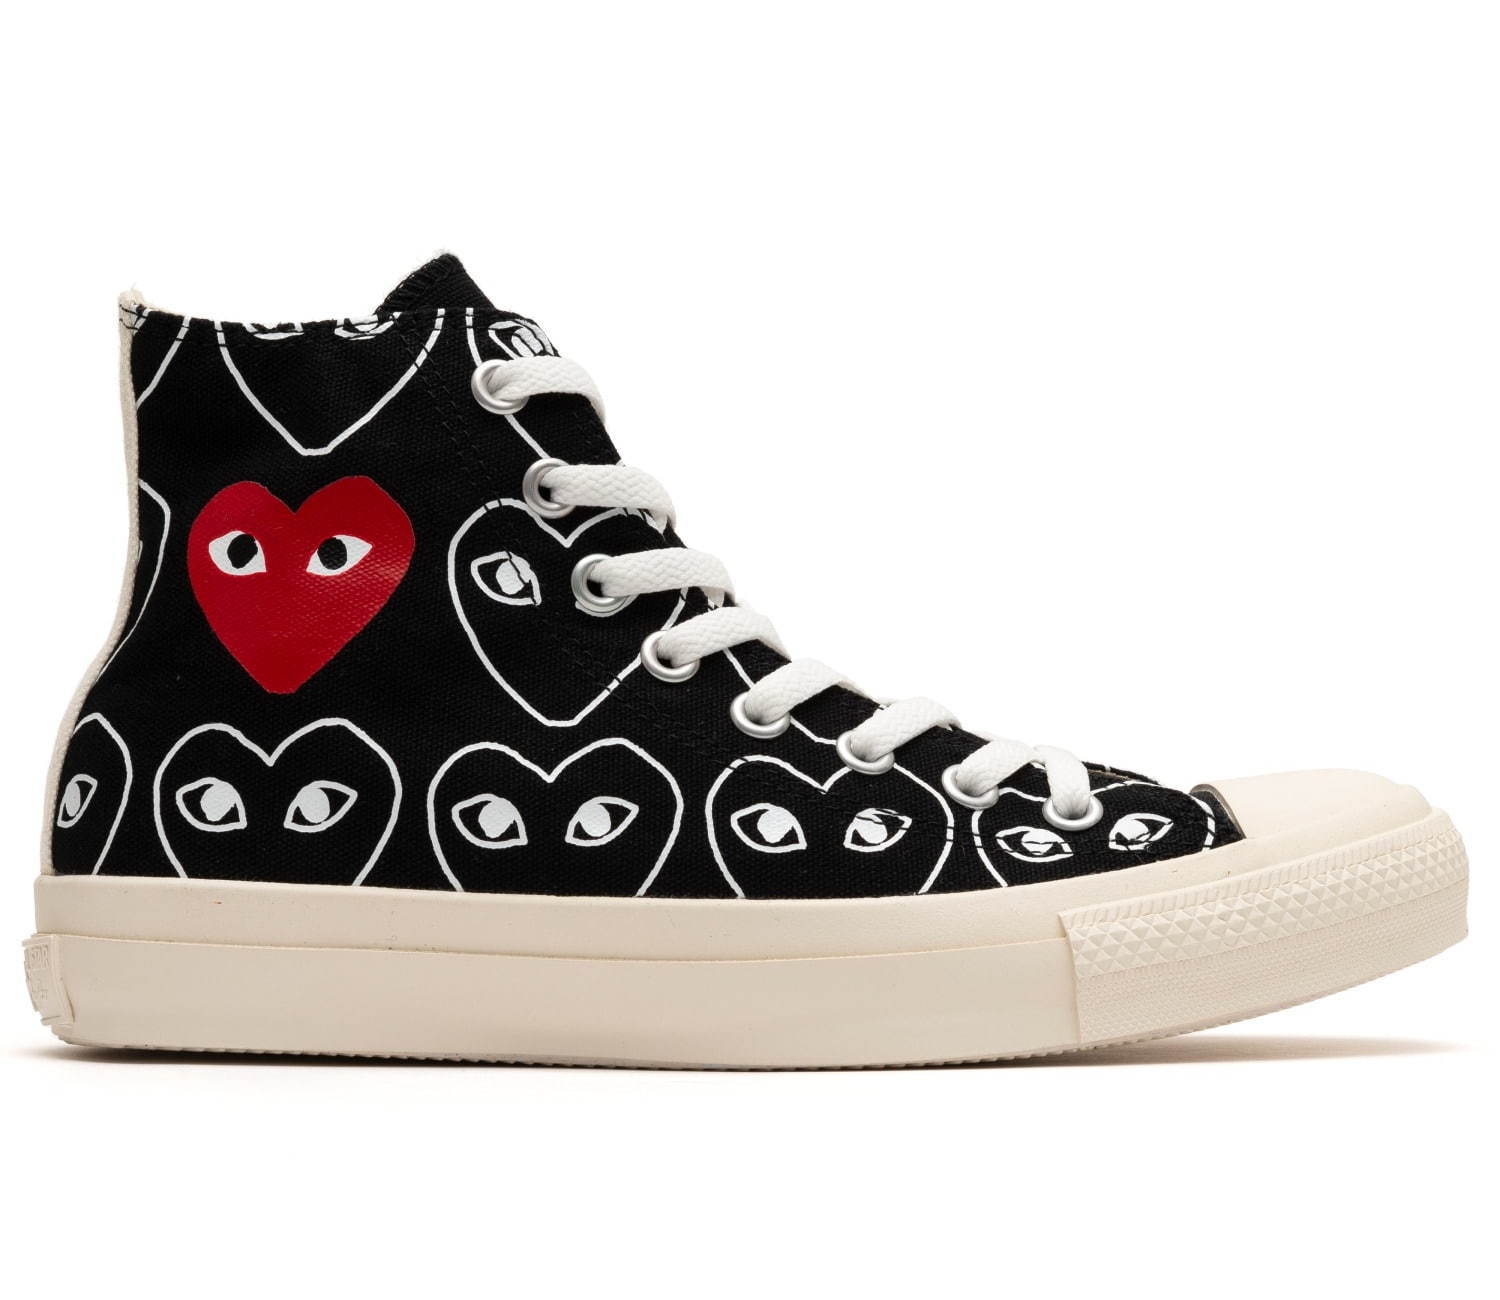 Comme des Garçons PLAY x Converse Chuck 70 Release Date and Pricing